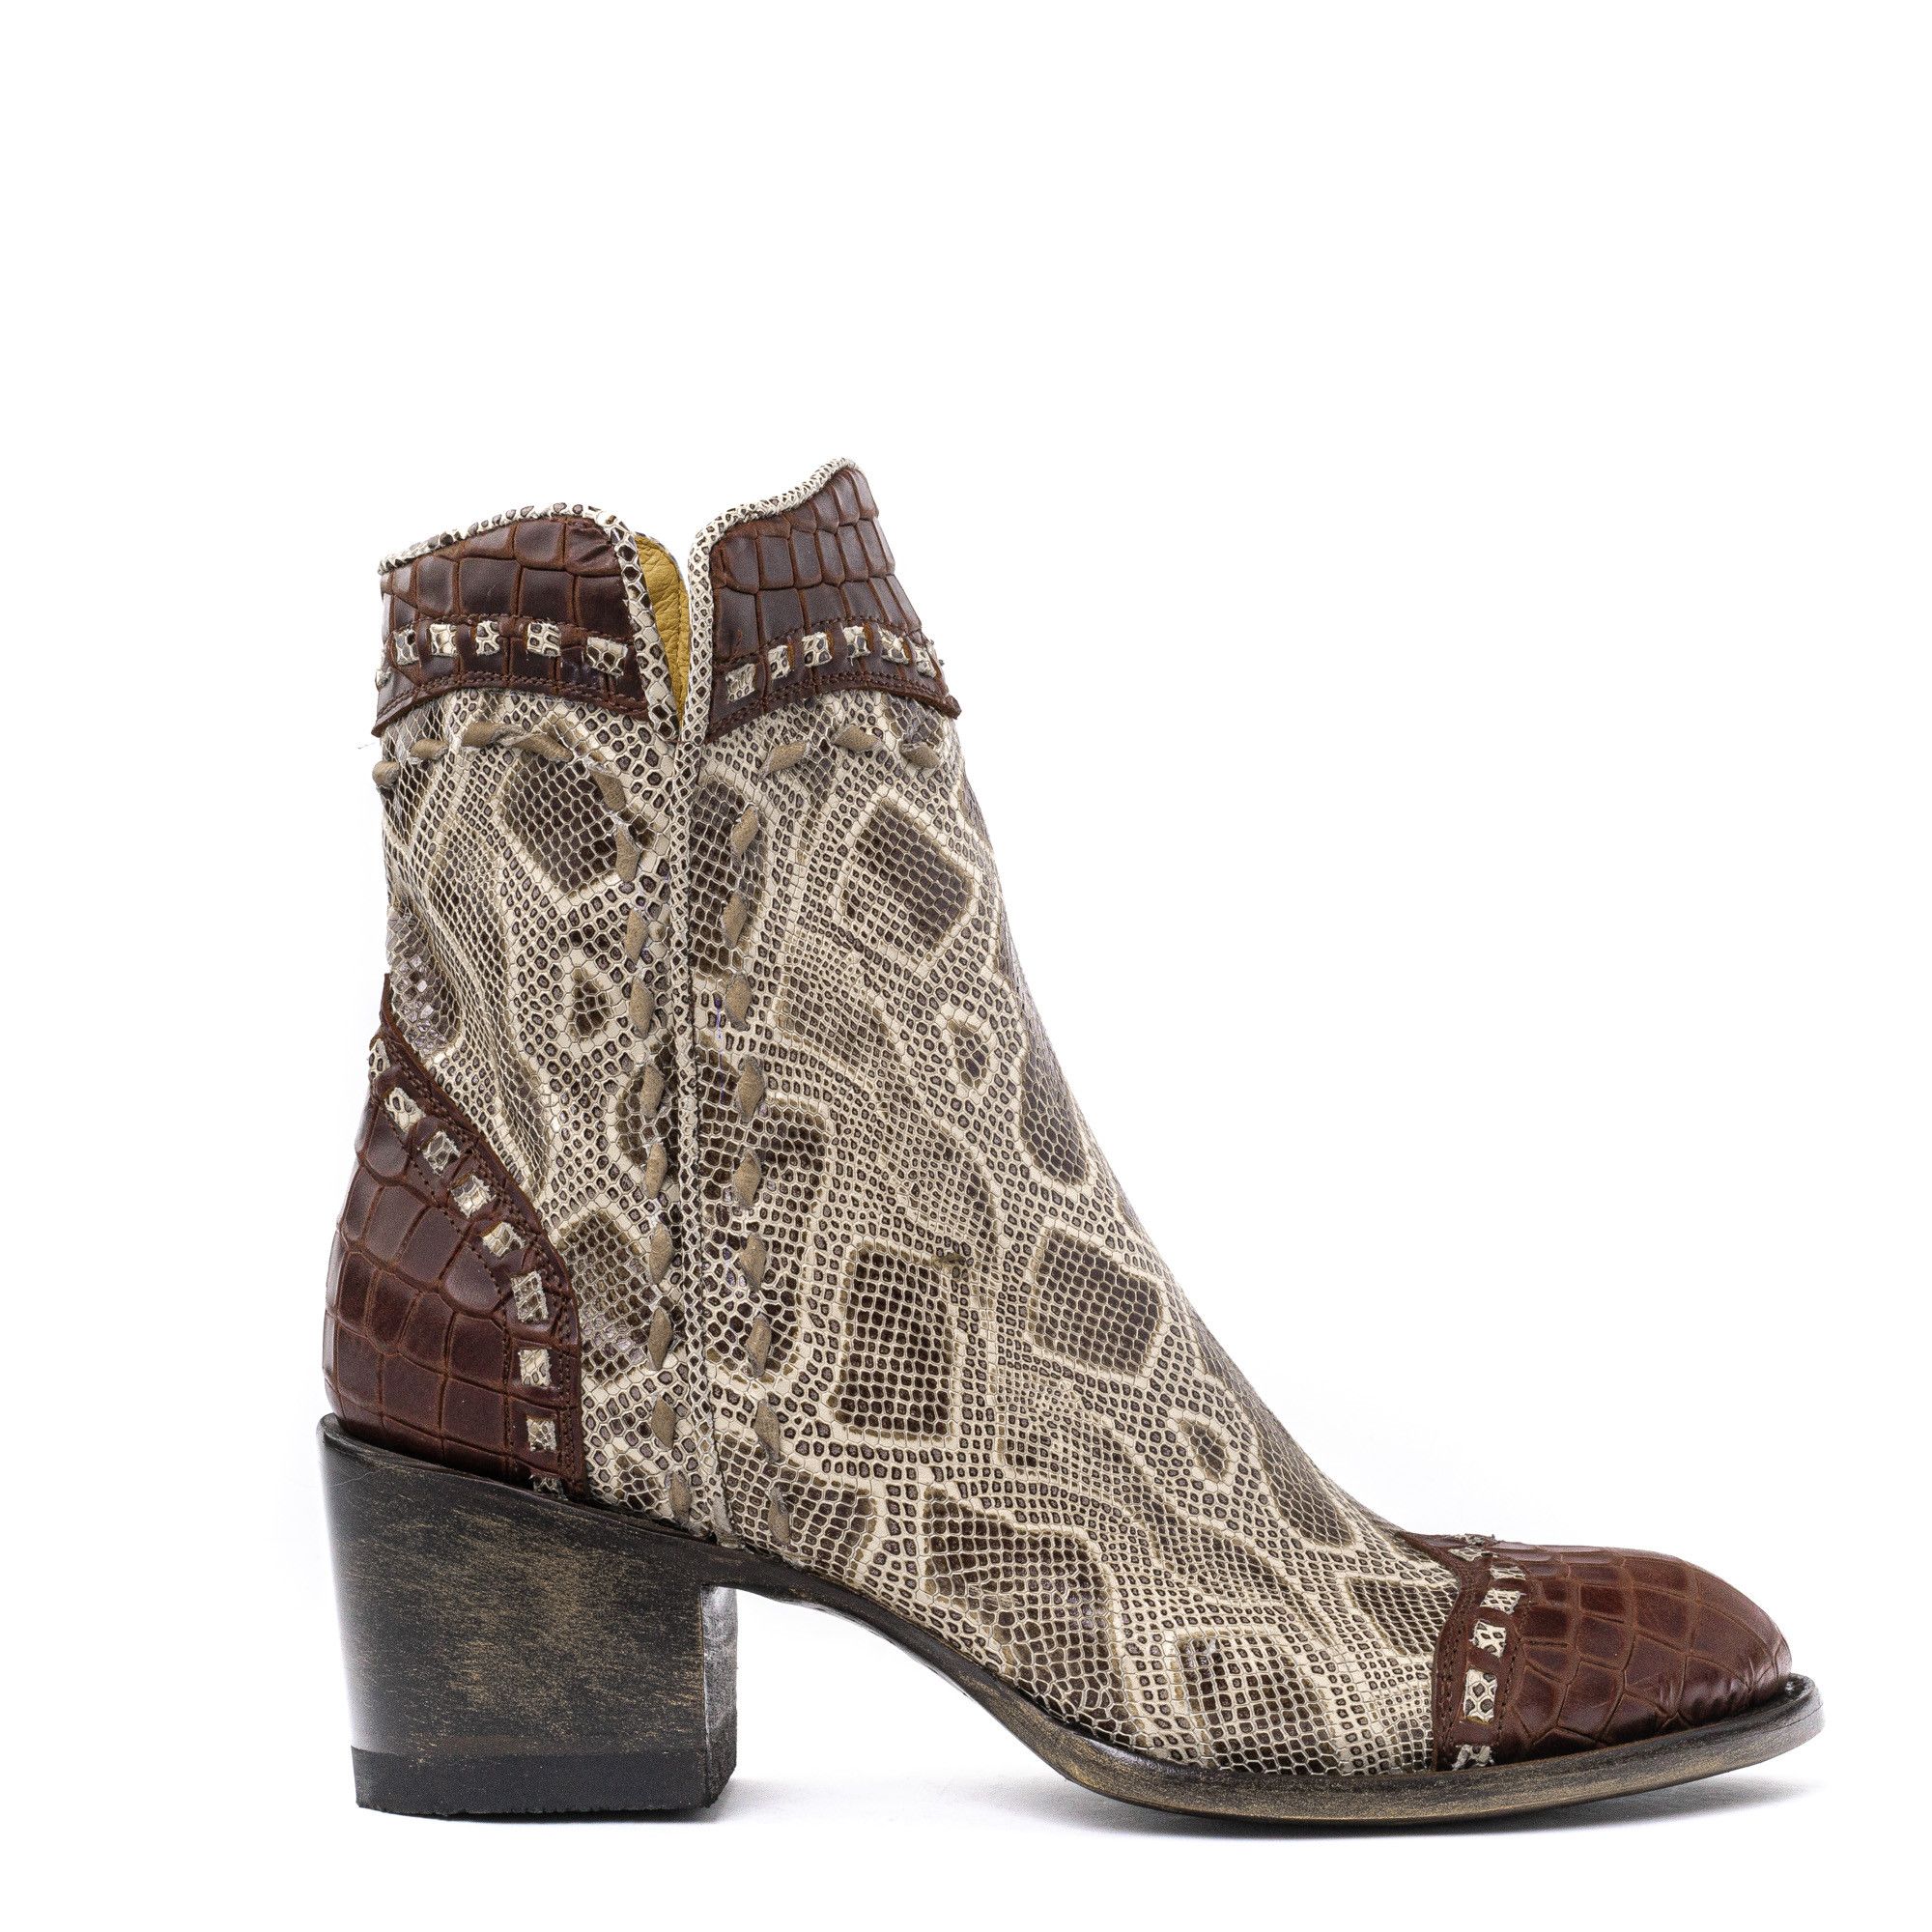 CRITHIER SNAKE FOSSIL ROUNDED ANKLE BOOTS WITH BRAID AND CUTOUTS,  SIDE ZIP CLOSURE  Total heel height 2.6 Inches  100% cow leat